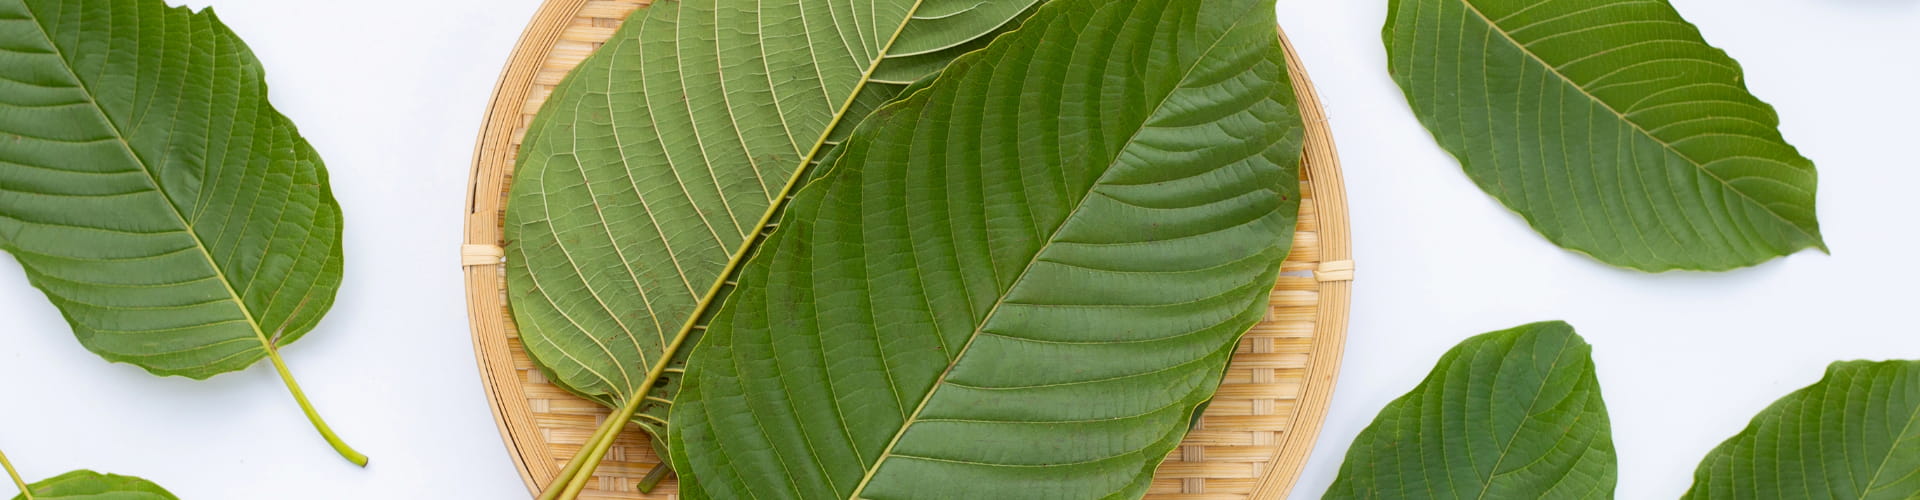 Kratom is Its Own Thing: Know the Facts for this One-of-a-Kind Botanical